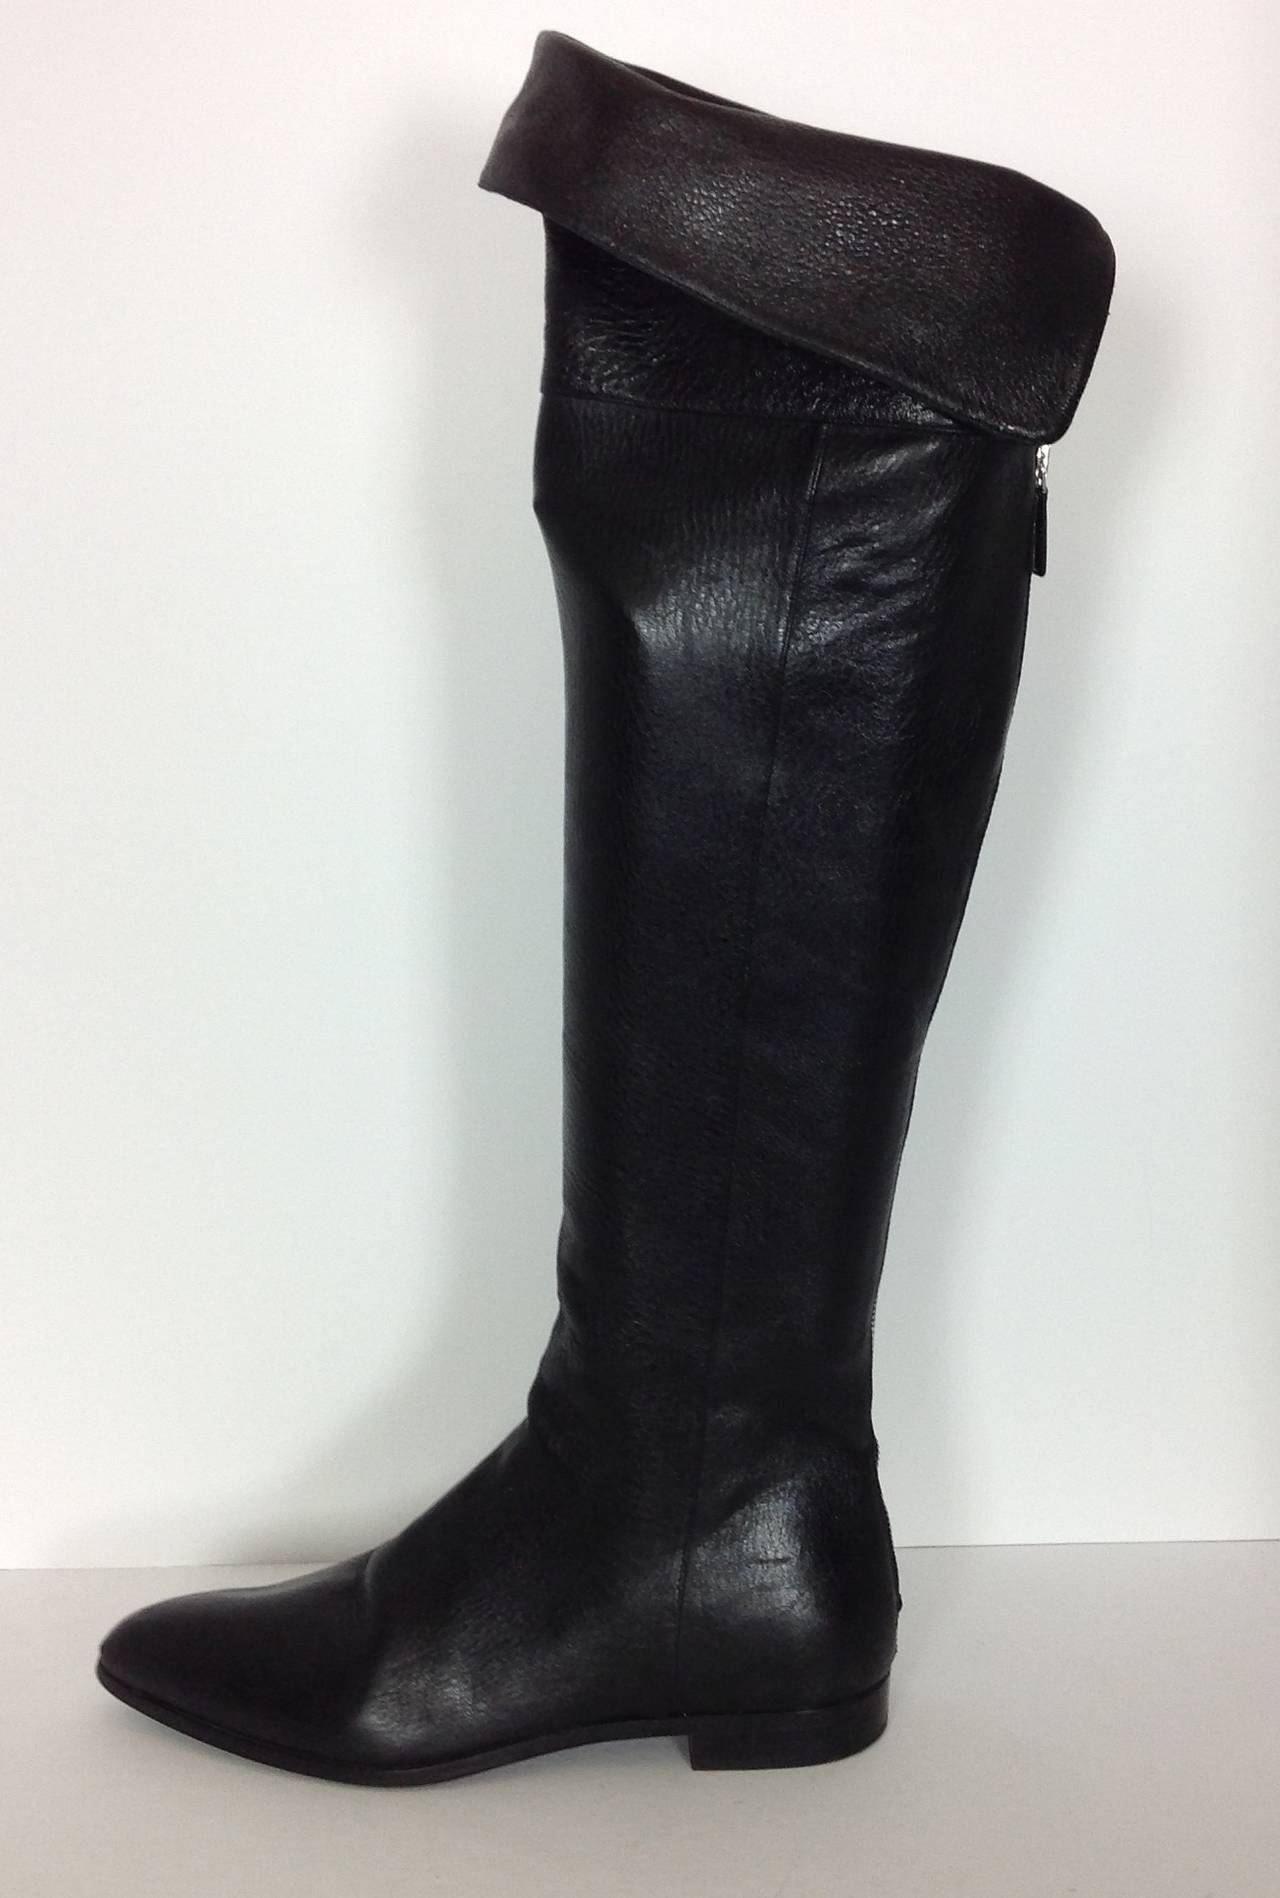 The softest black leather Prada over the knee boots.
Flat 3/4